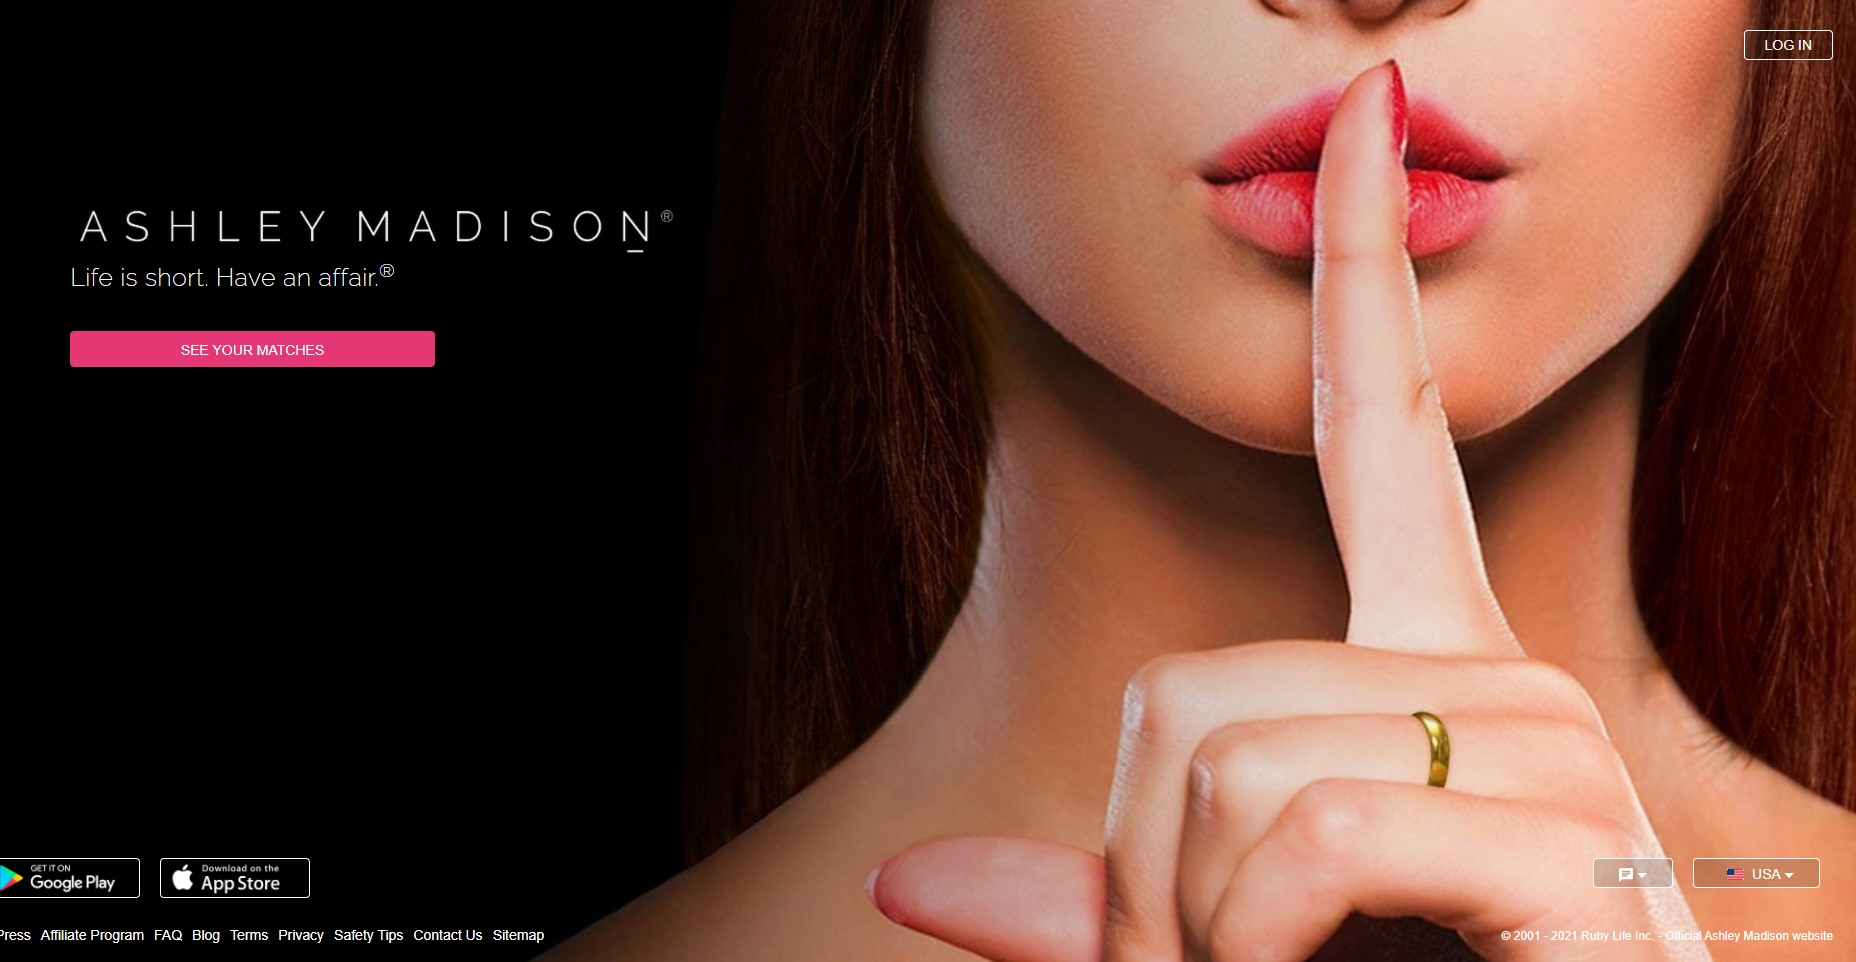 Ashley Madison Experiences & Opinions